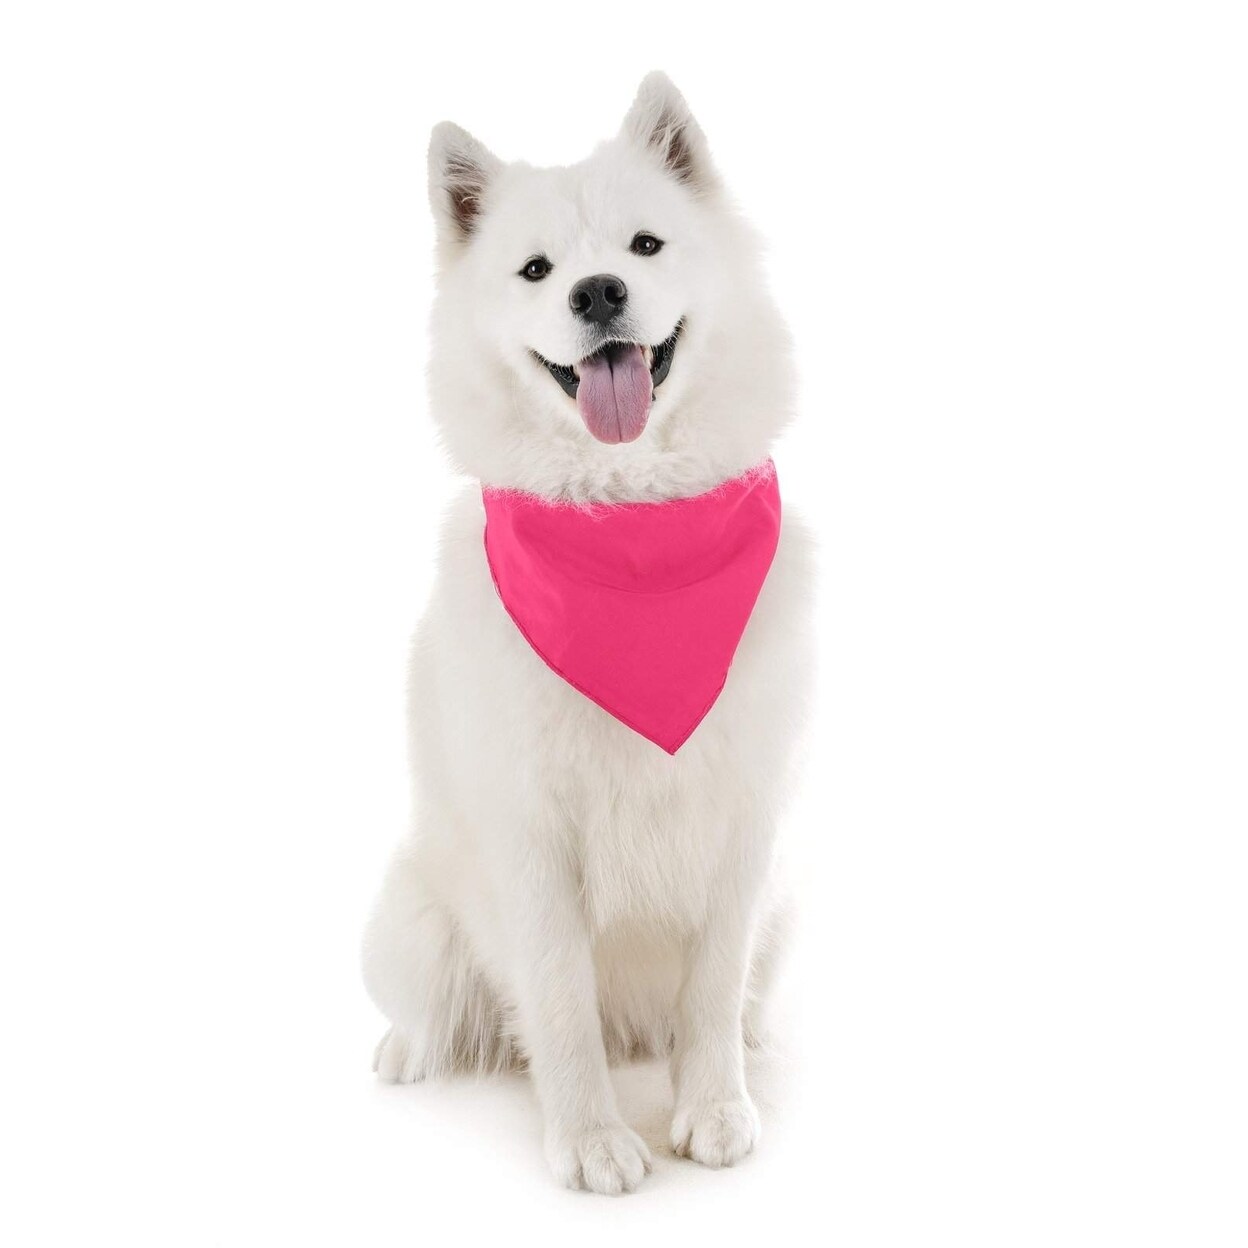 Mechaly   Dog Plain Bandanas - 2 Pack - Scarf Triangle Bibs for Small Medium and Large Puppies Dogs and Cats